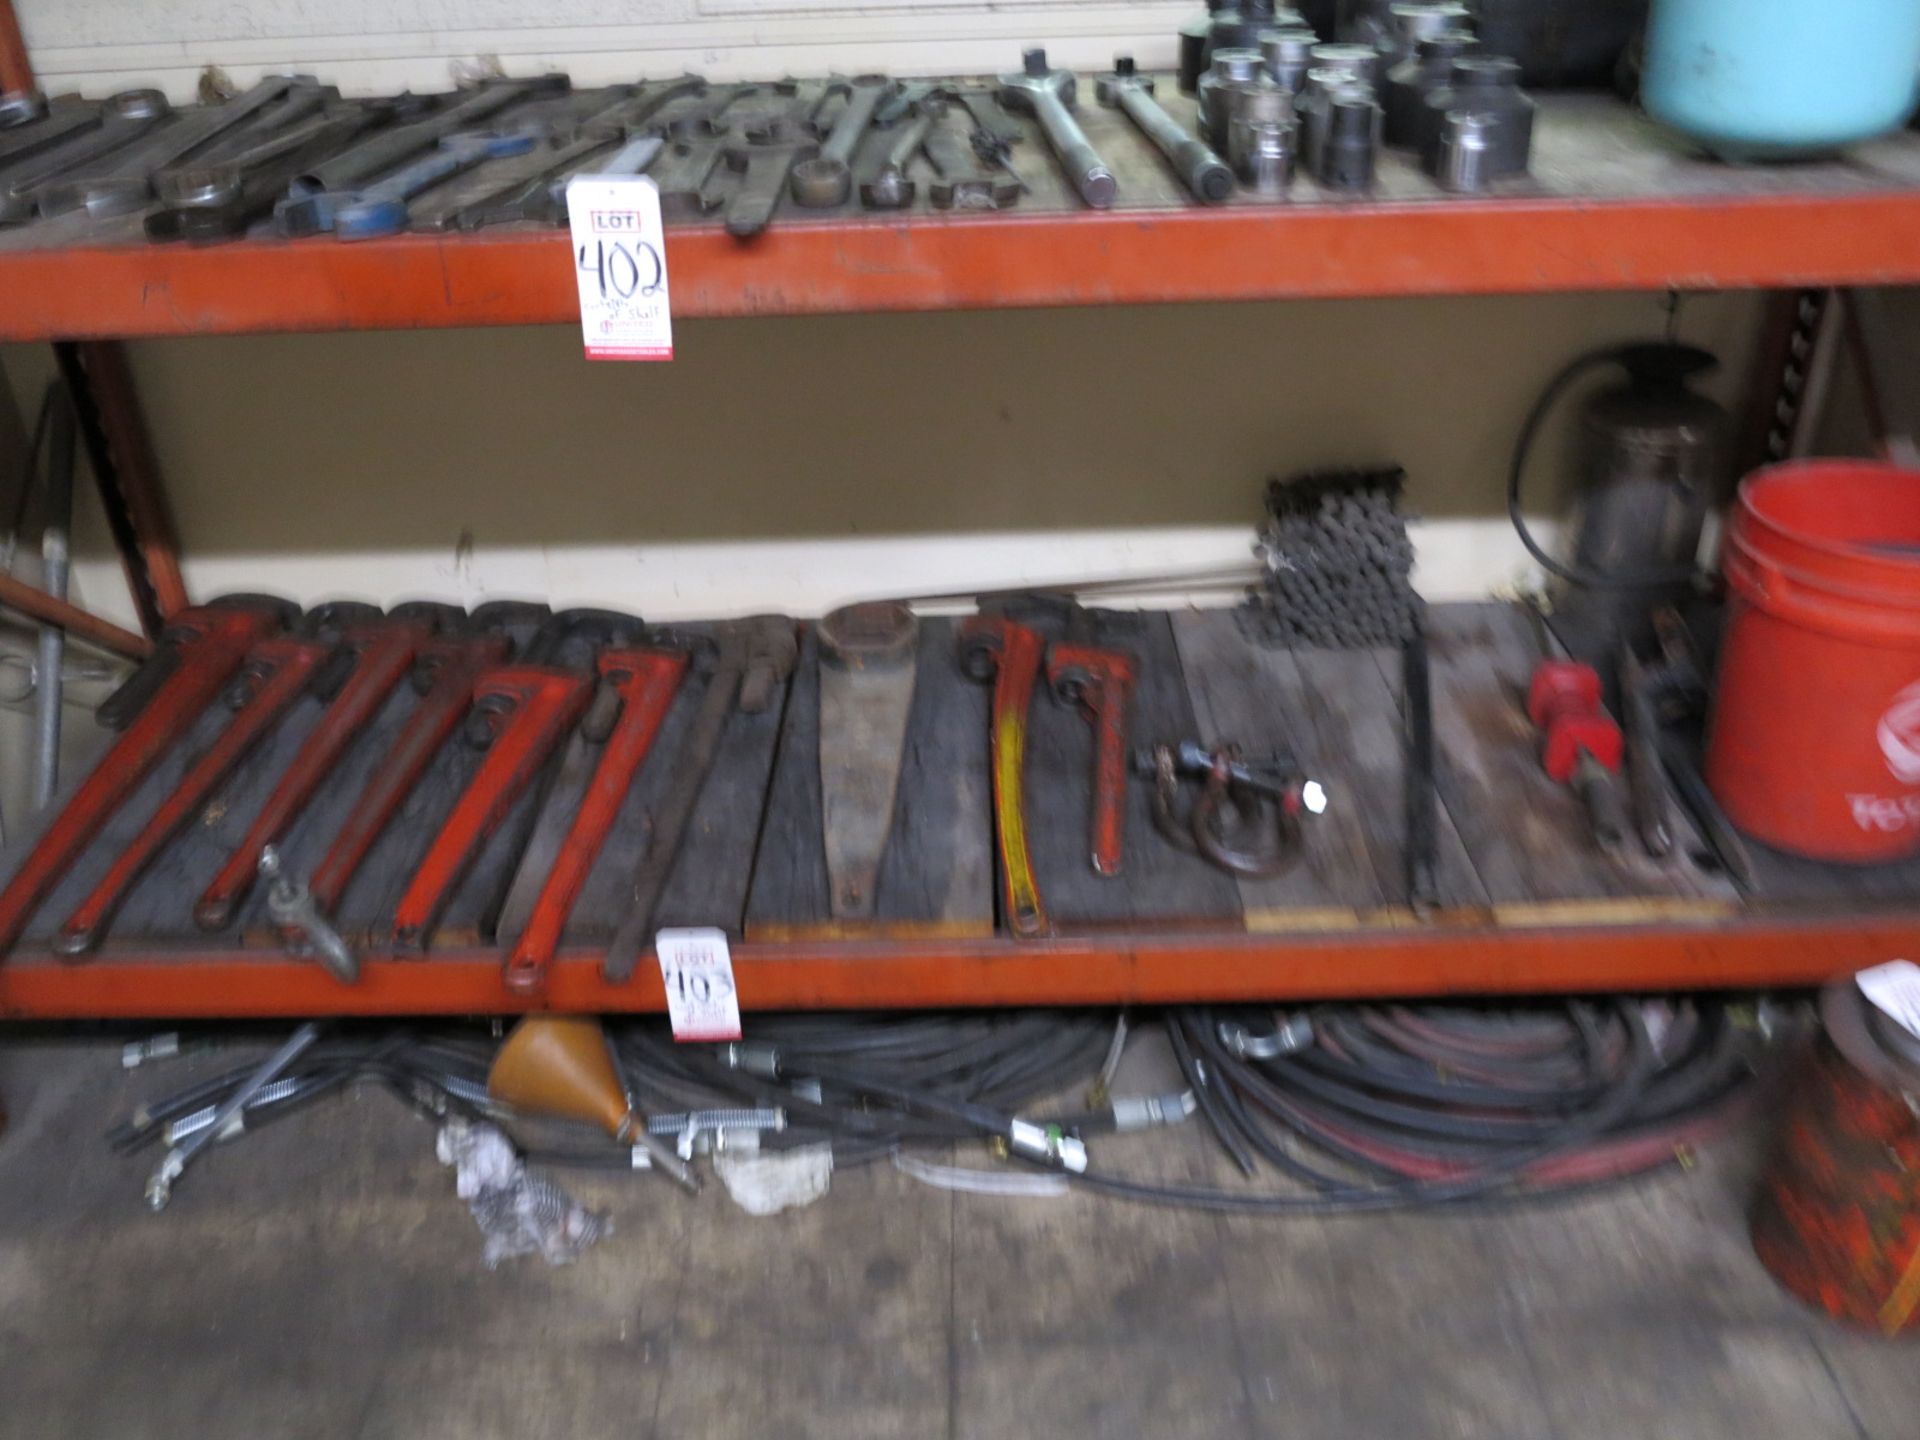 LOT - (9) PIPE WRENCHES UP TO 4', SLIDE HAMMER, ETC.